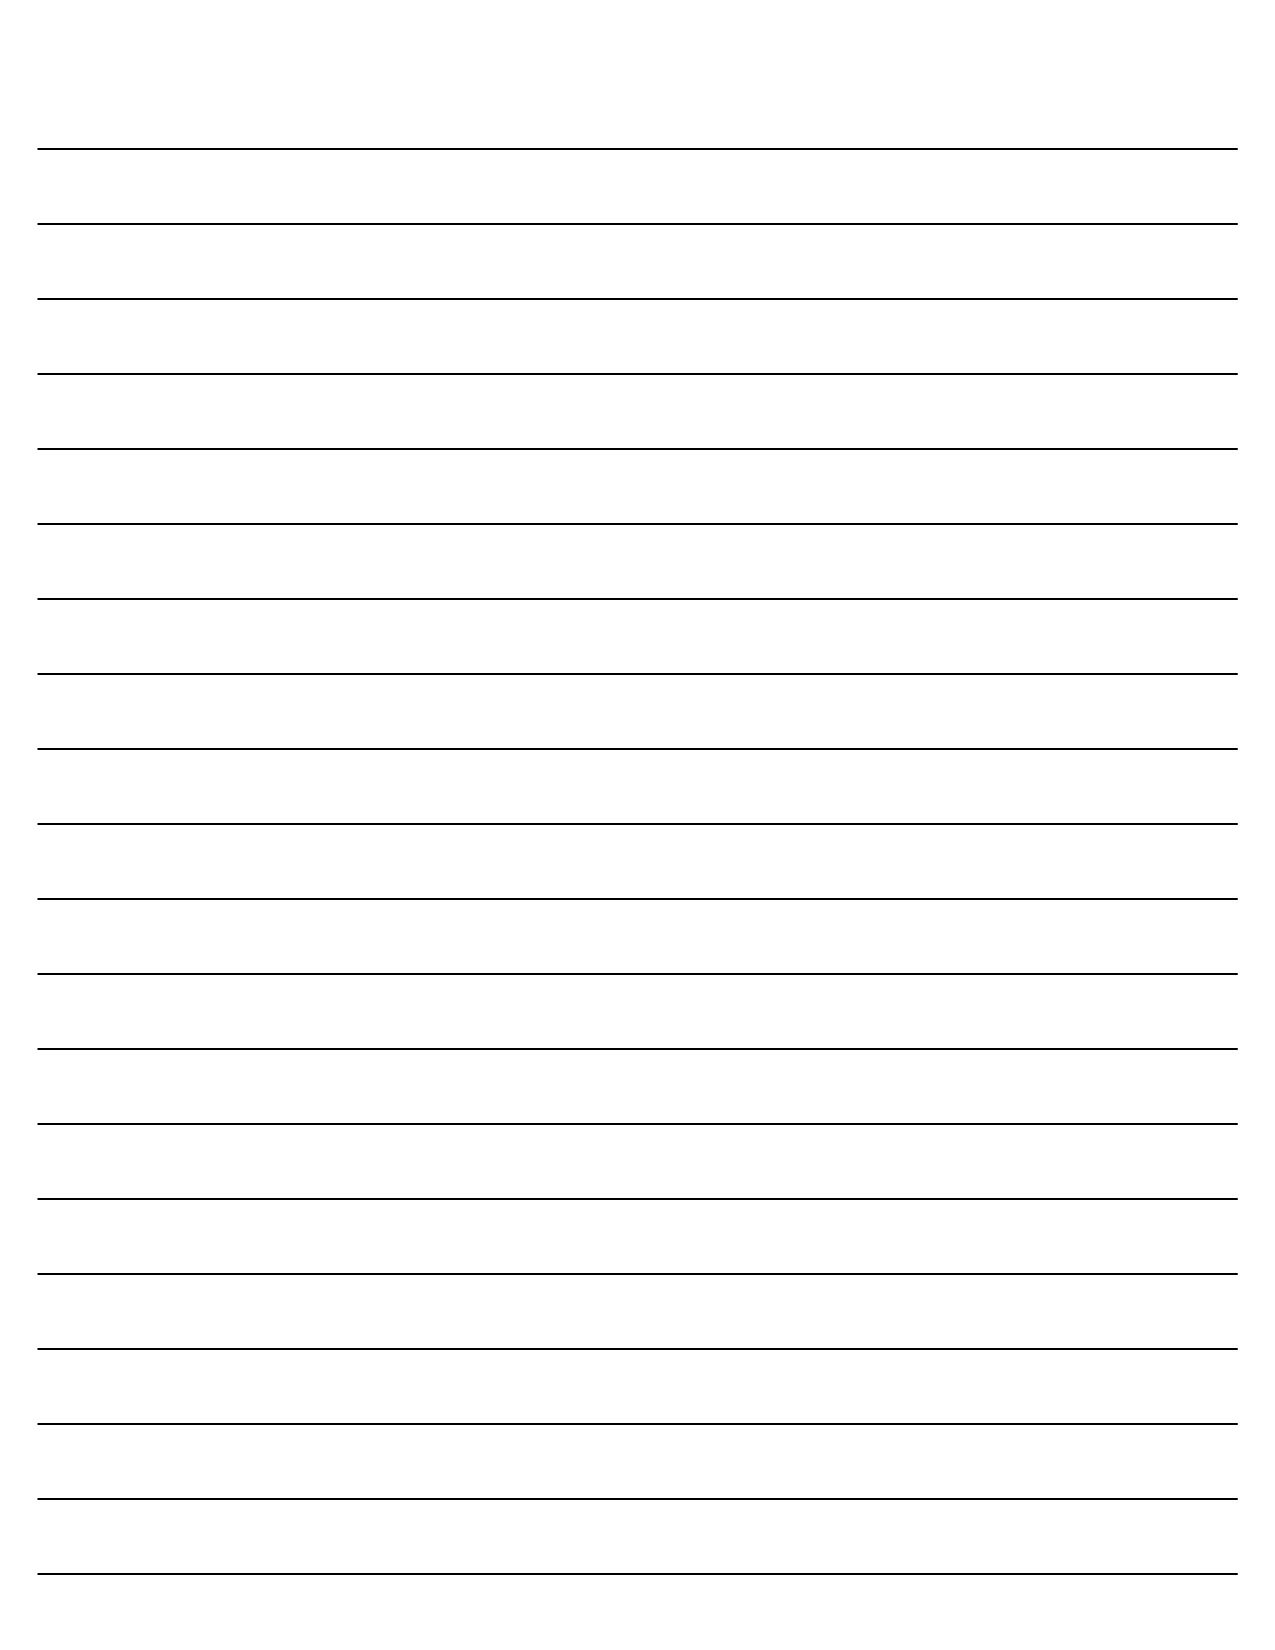 Free Printable Lined Writing Paper Template | Printables | Lined - Free Printable Notebook Paper